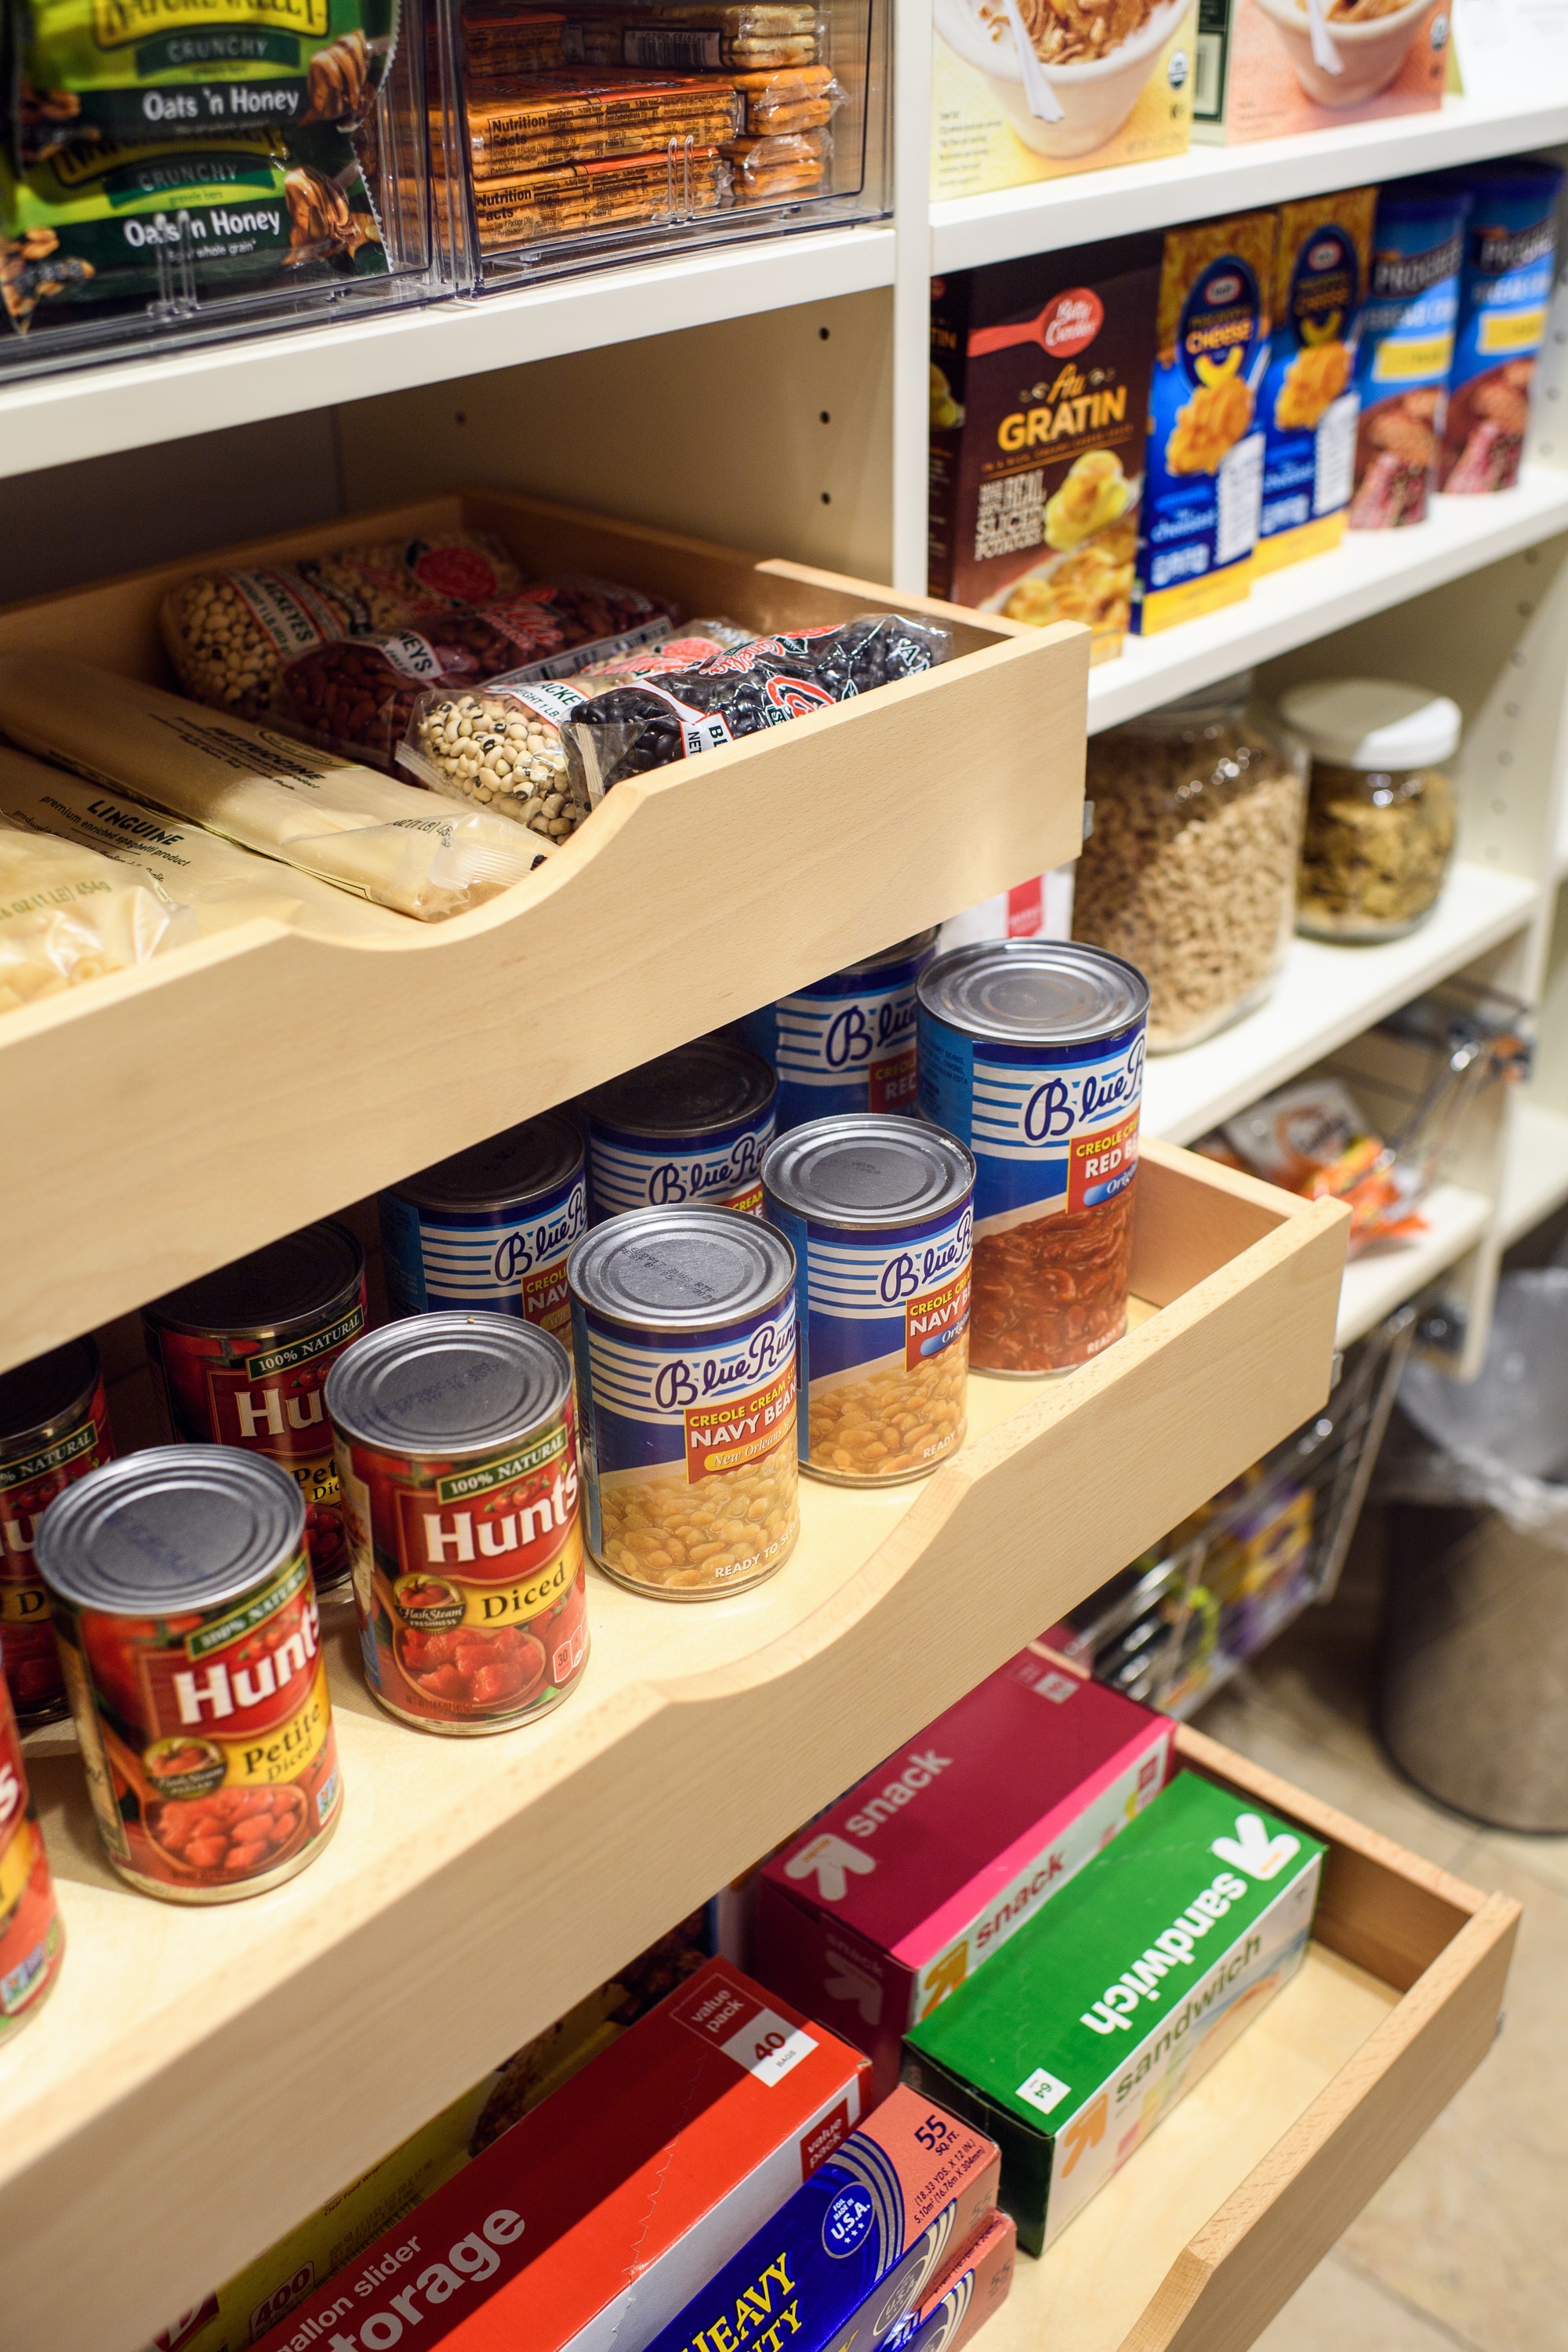 Close up of food items on pantry shelves